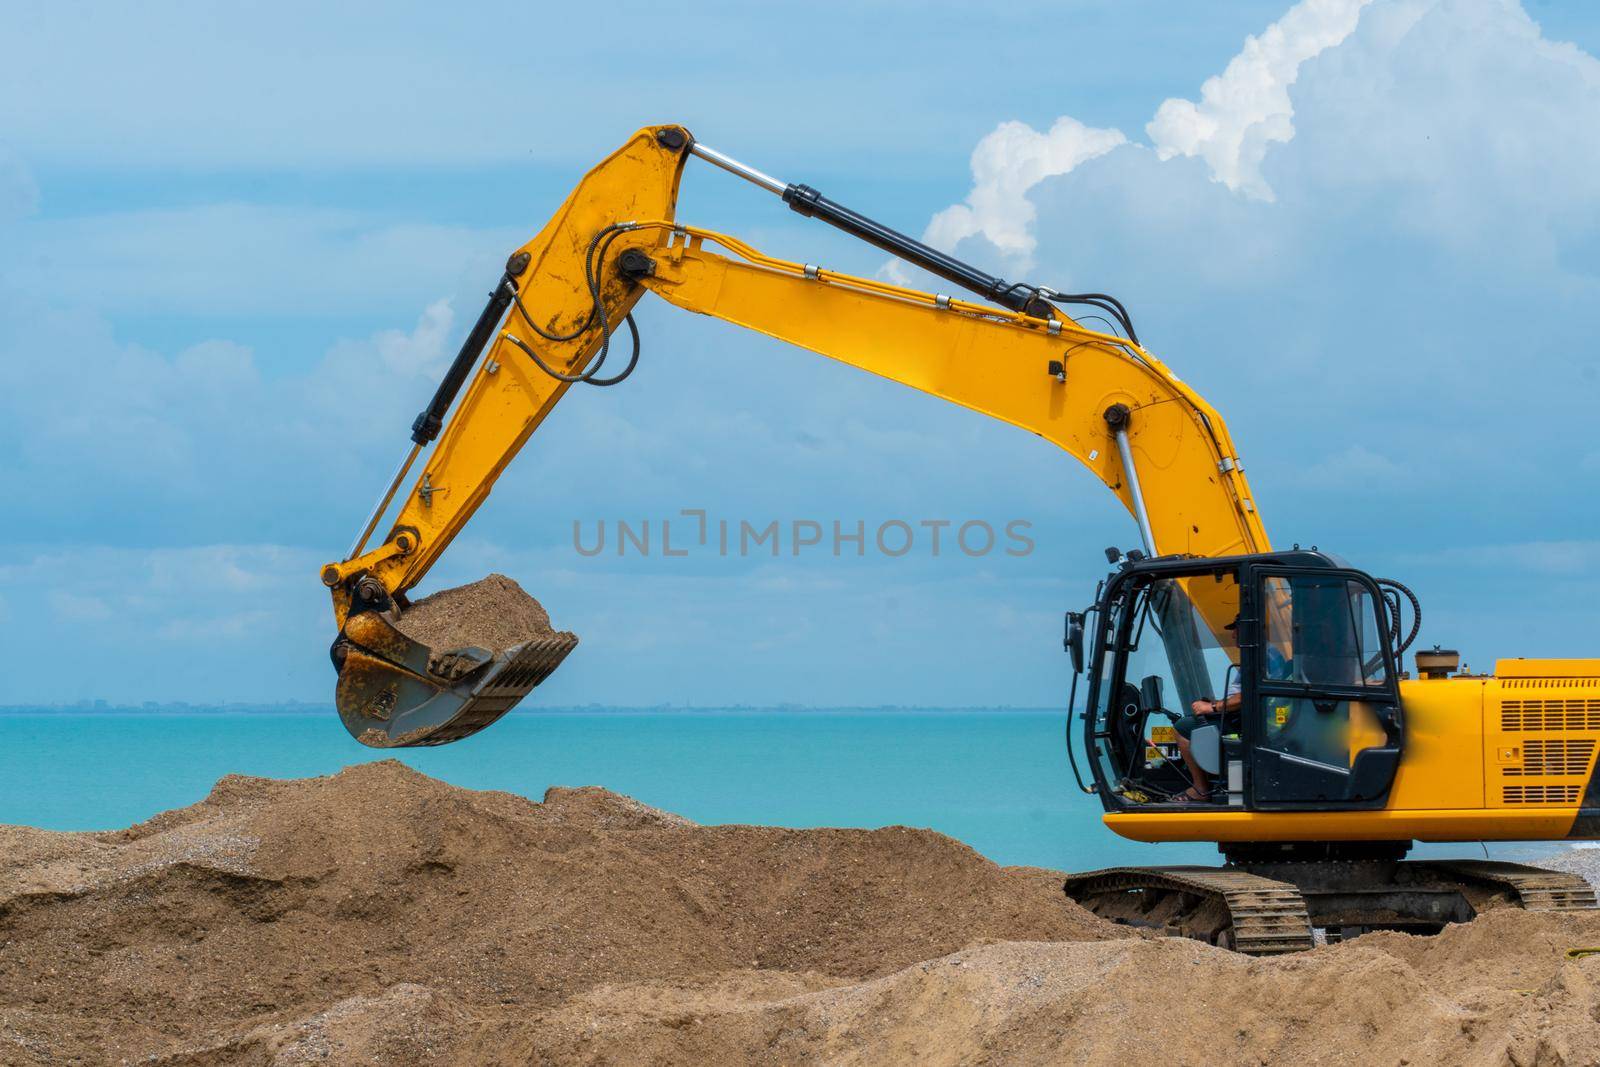 Oil industry heavy machine sea excavator construction sand silhouette business, from mining bucket for excavation and power earth, yellow excavate. Excavating working stone, stone by 89167702191